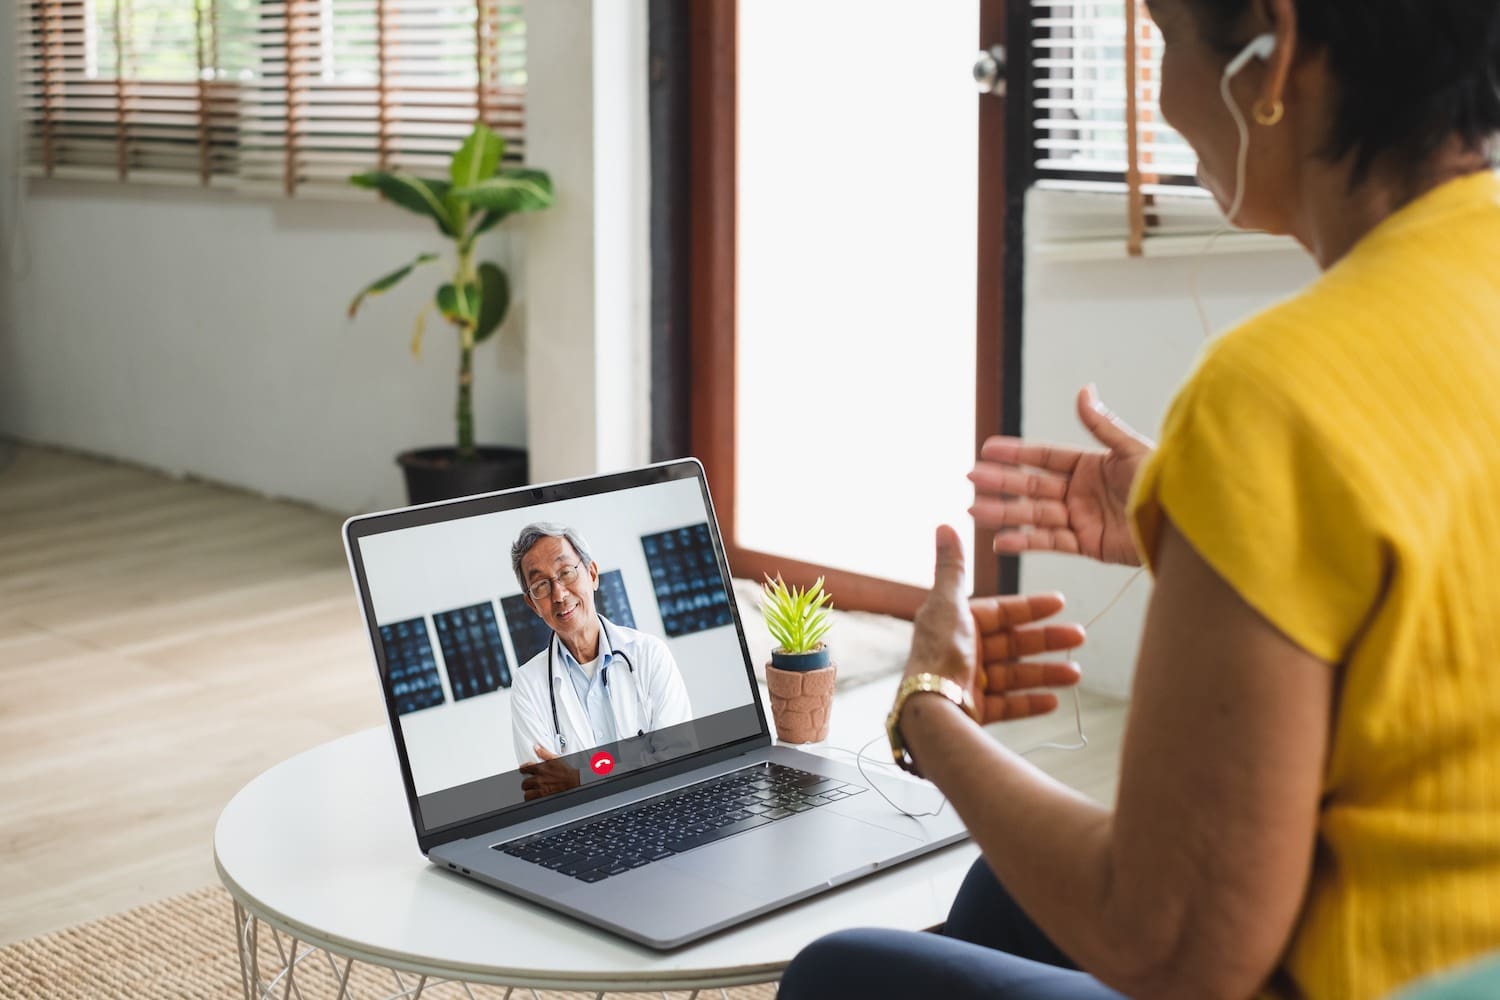 Making telehealth work in the ‘new normal’